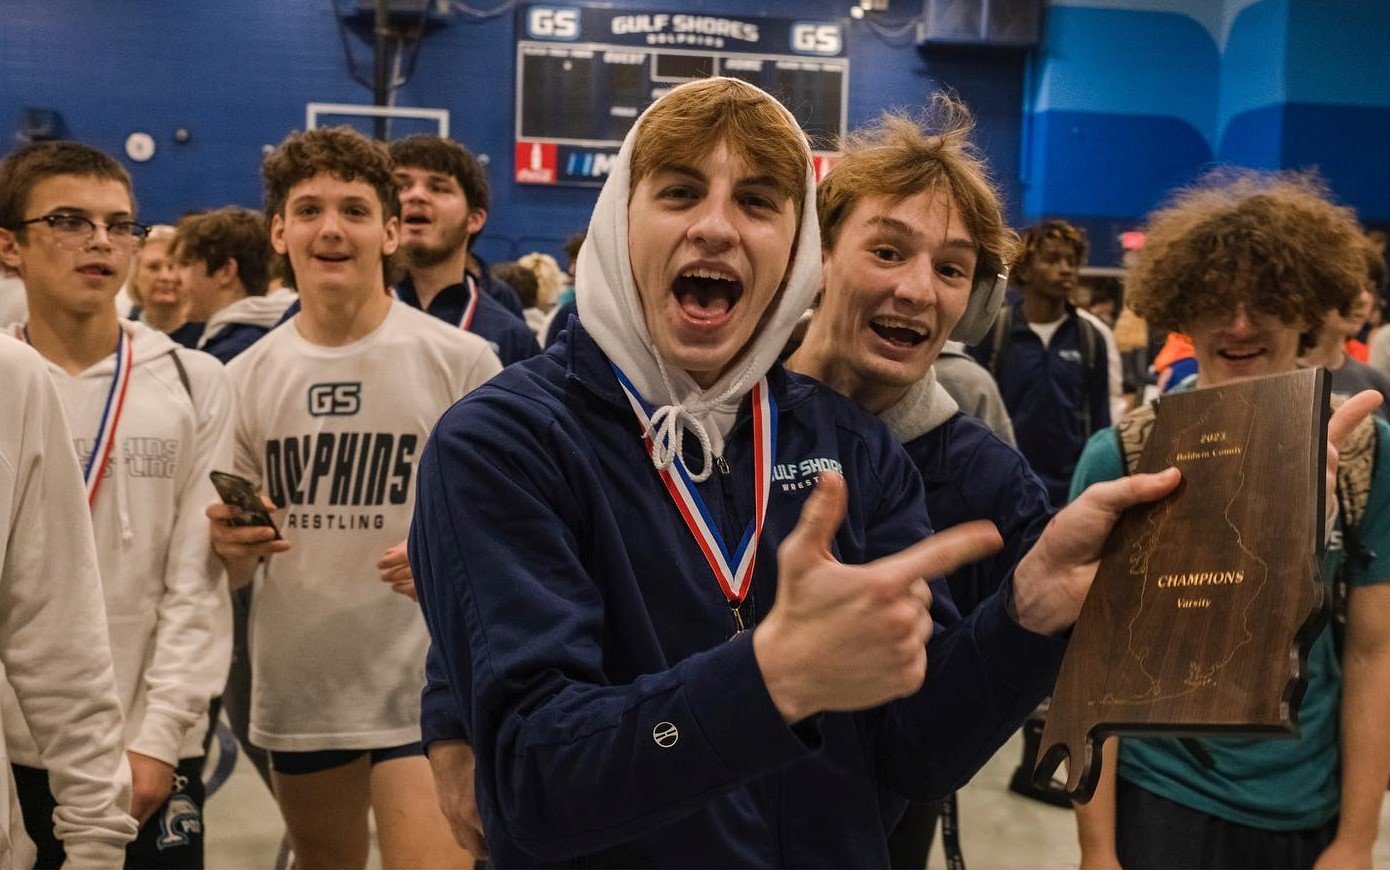 Gulf Shores senior Nick Carris, junior Ethan Sharkey and teammates celebrate with the Baldwin County wrestling championship plaque after he and six other Dolphins won their weight classes Saturday, Jan. 7. It marked a second straight county championship for Gulf Shores wrestlers.